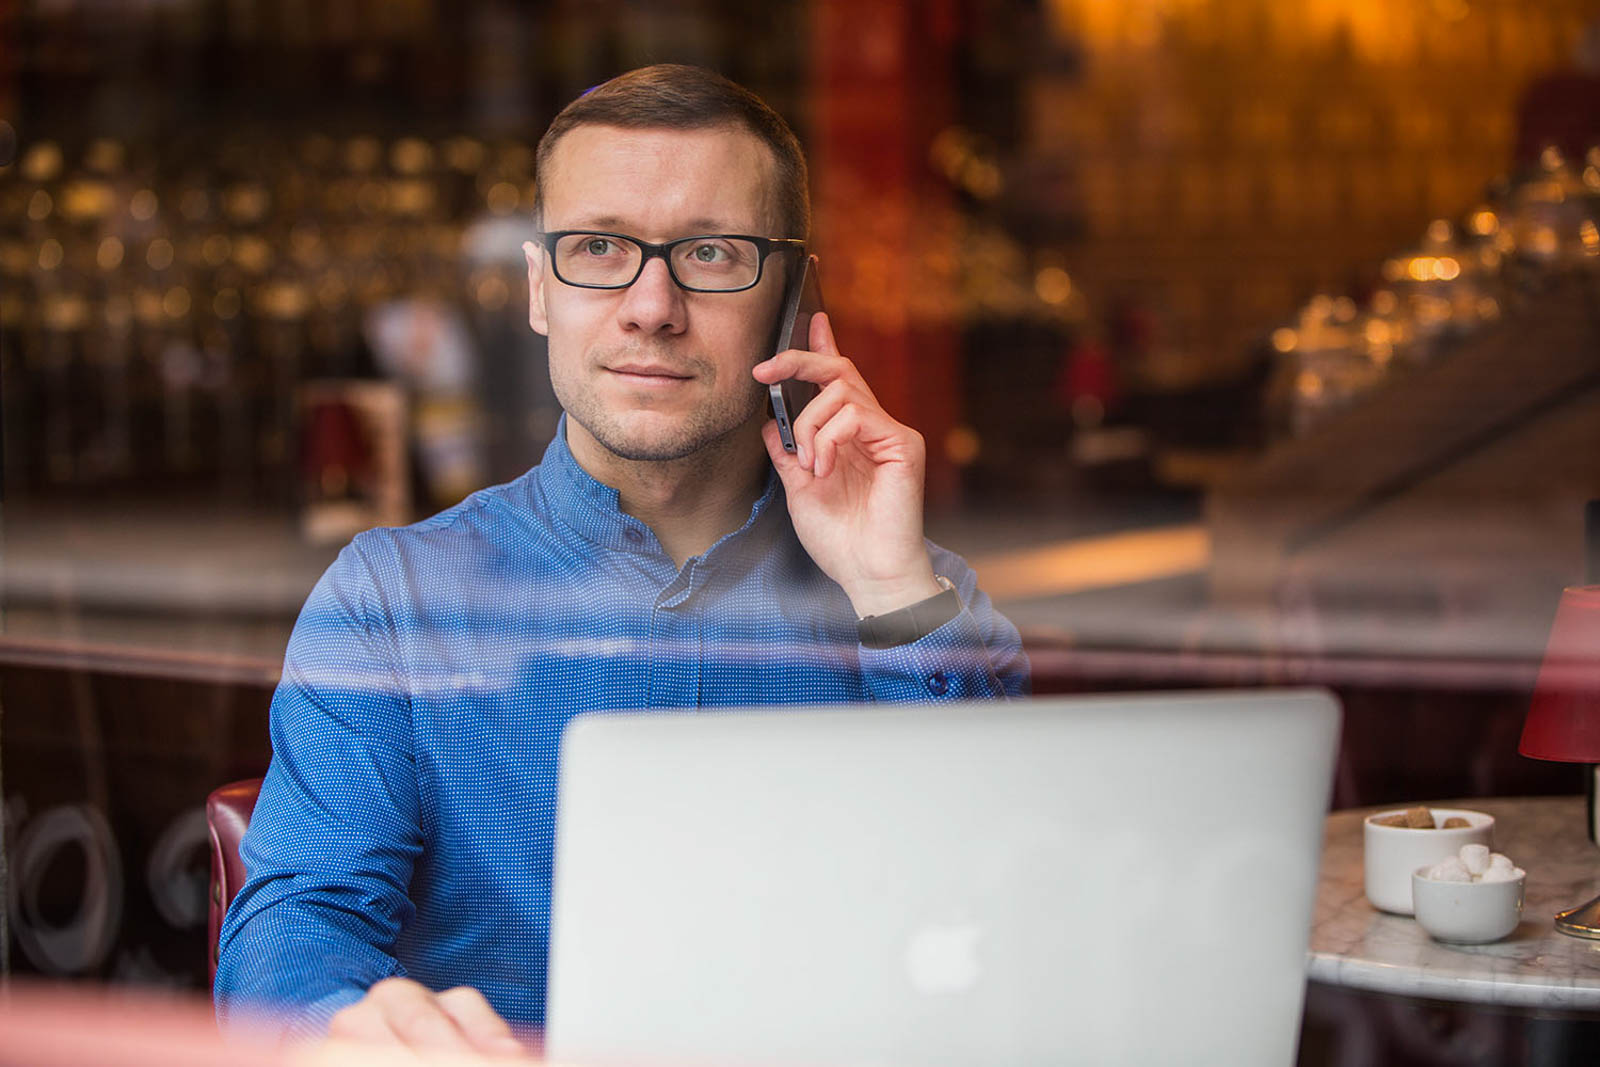 Dublin headshot of man sitting in coffee shop while on phone with laptop